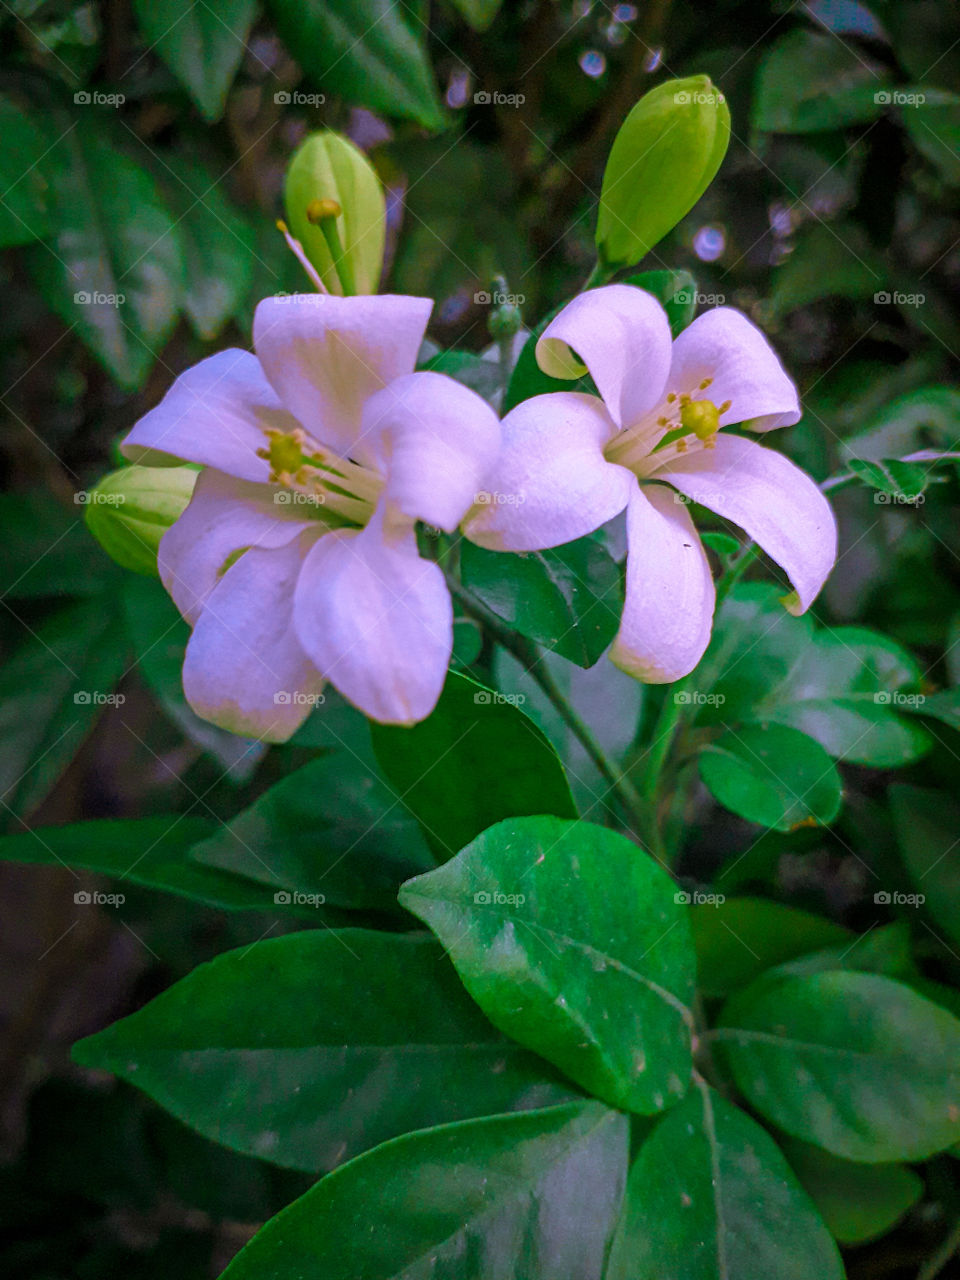 The name of this flower is Manokamini.This photo has been taken at dusk.